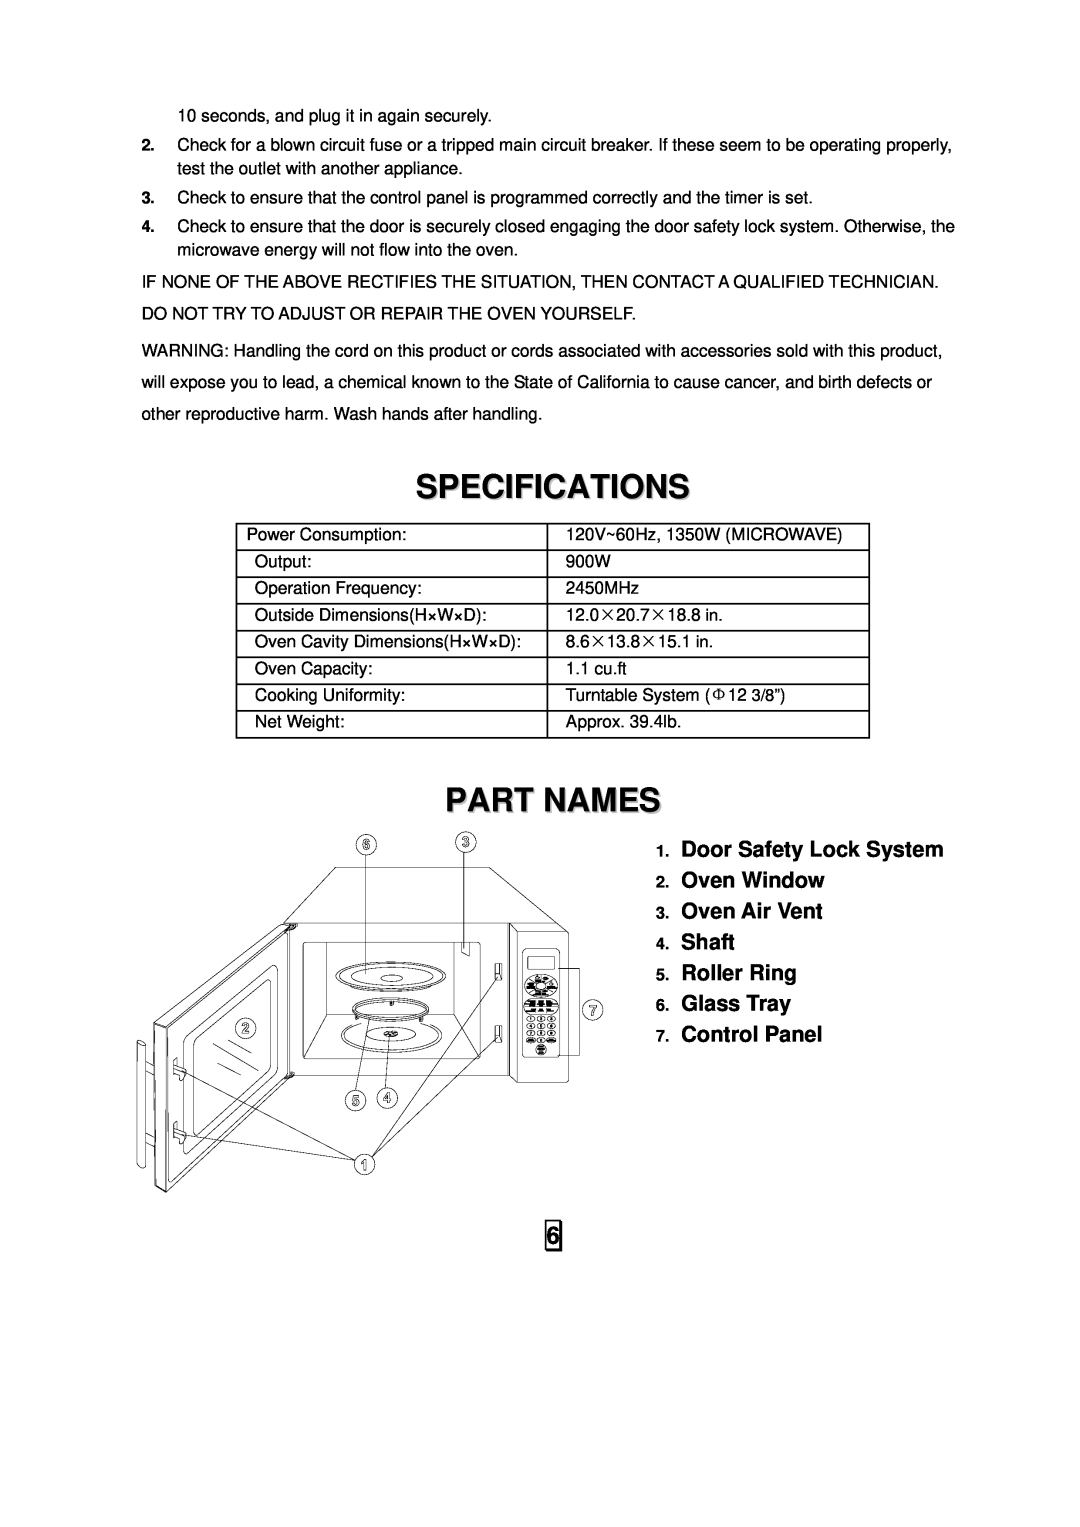 Sanyo EM-S7595S Specifications, Part Names, Door Safety Lock System 2. Oven Window, Oven Air Vent 4. Shaft 5. Roller Ring 